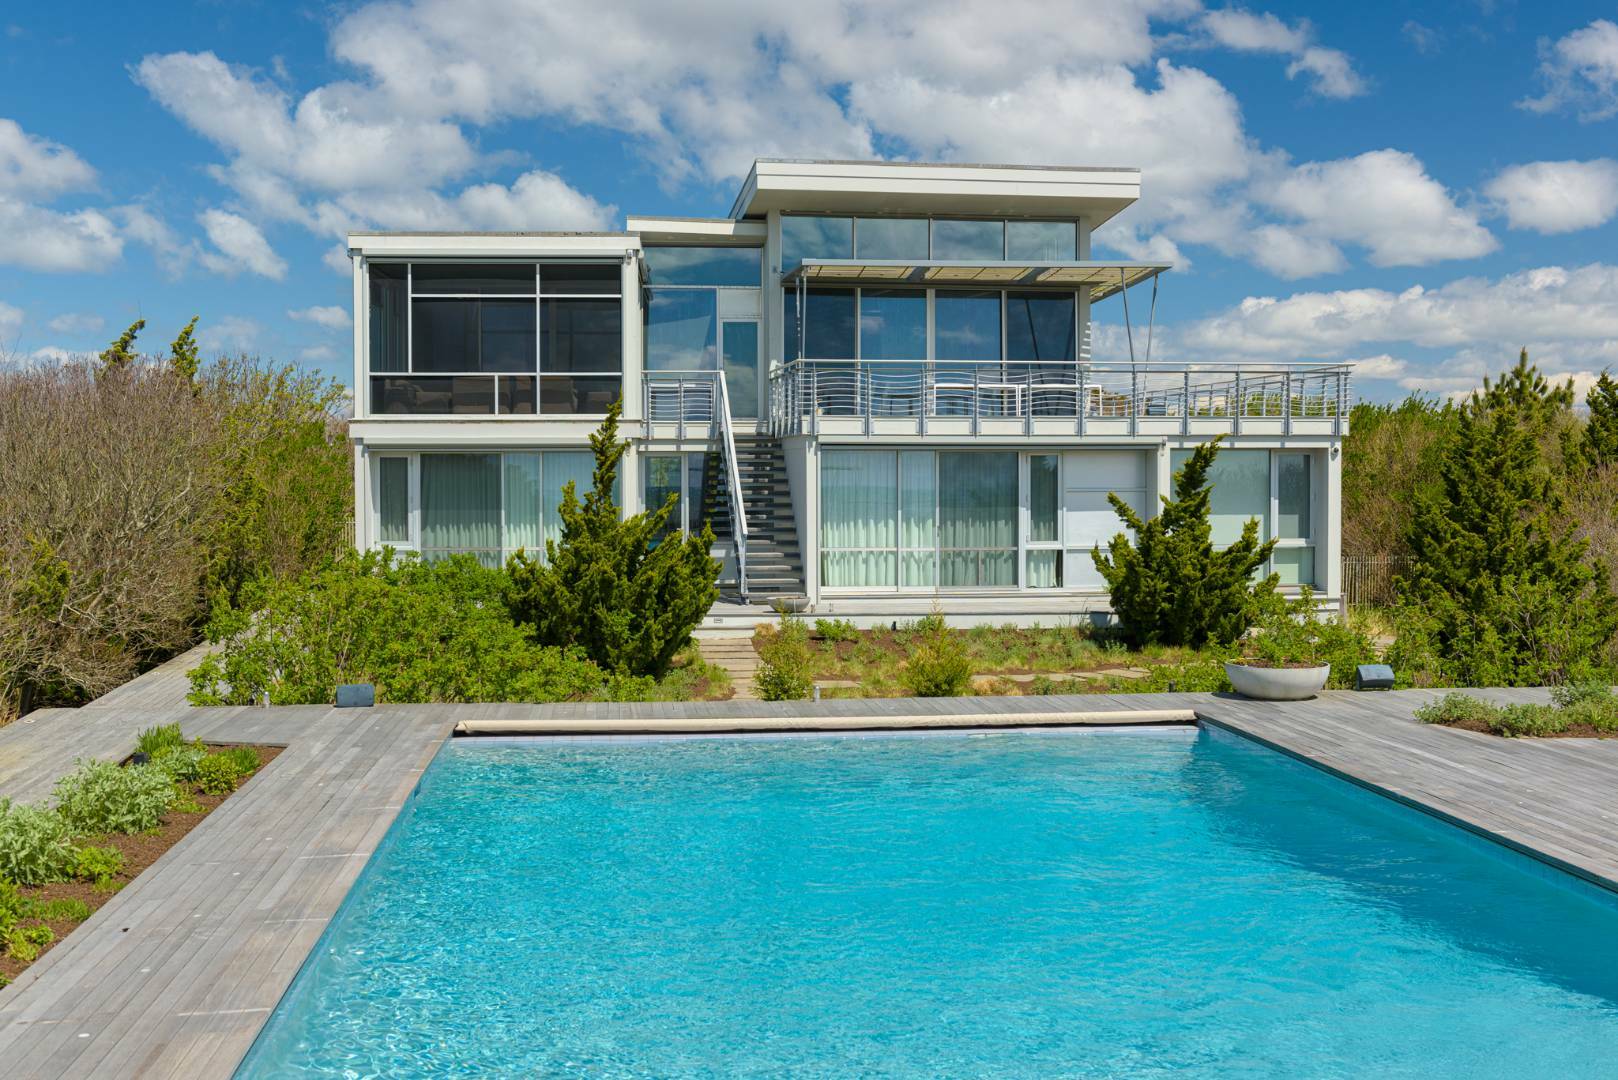 Recently sold in Sagaponack at 1 Potato Road.